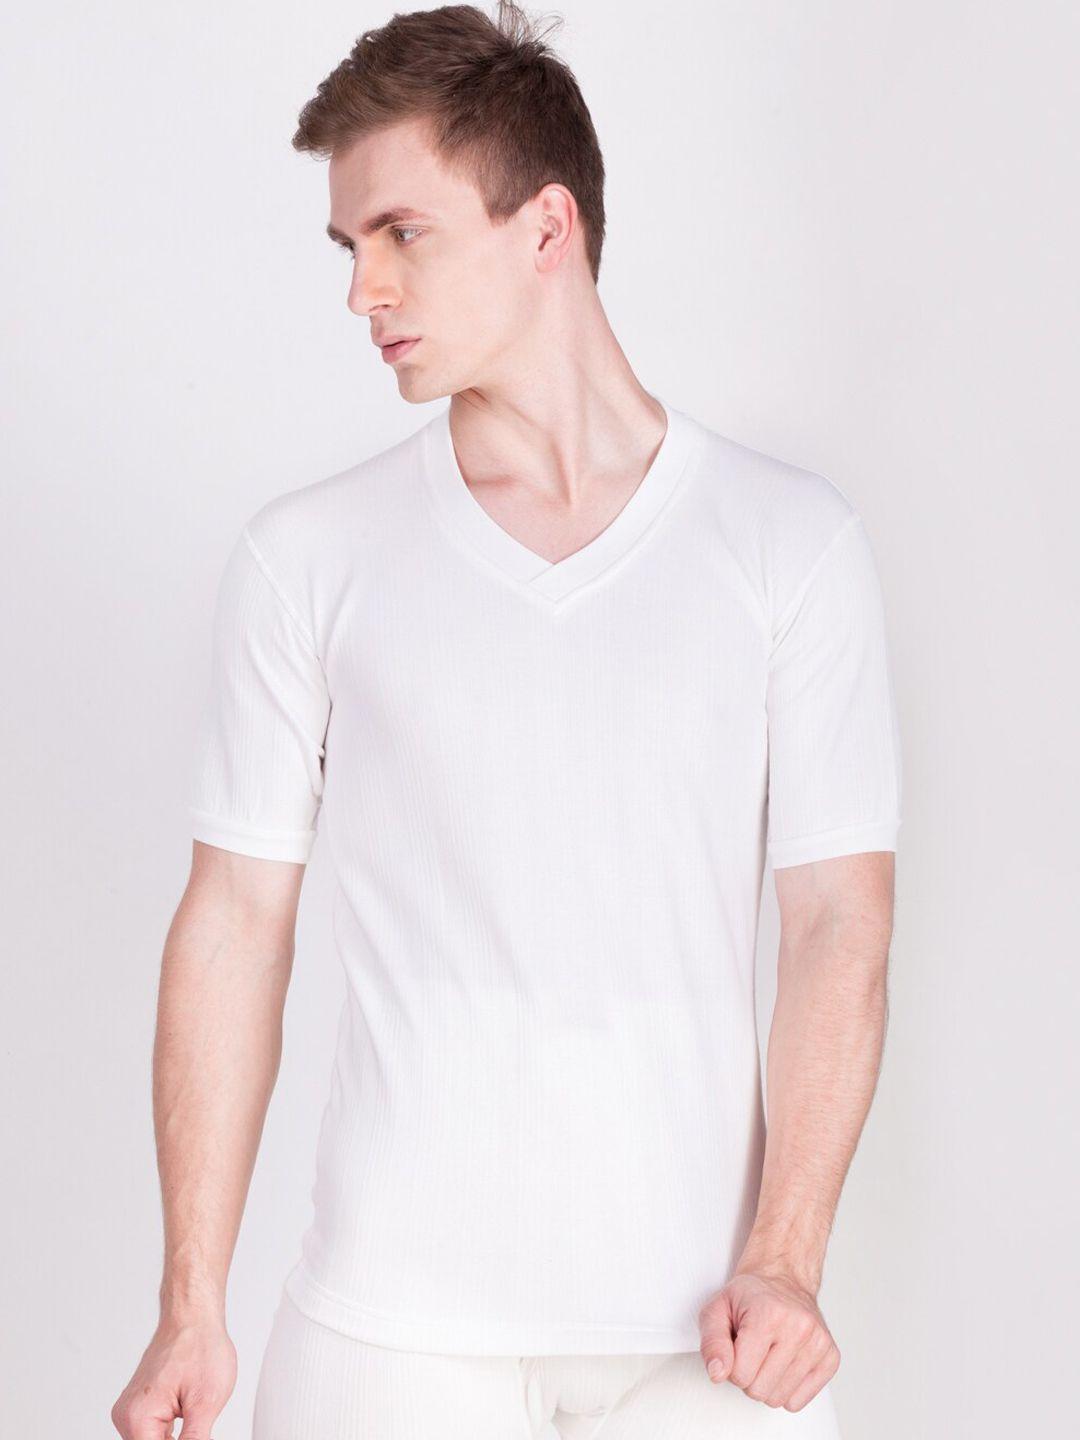 dollar ultra men white solid cotton thermal tops